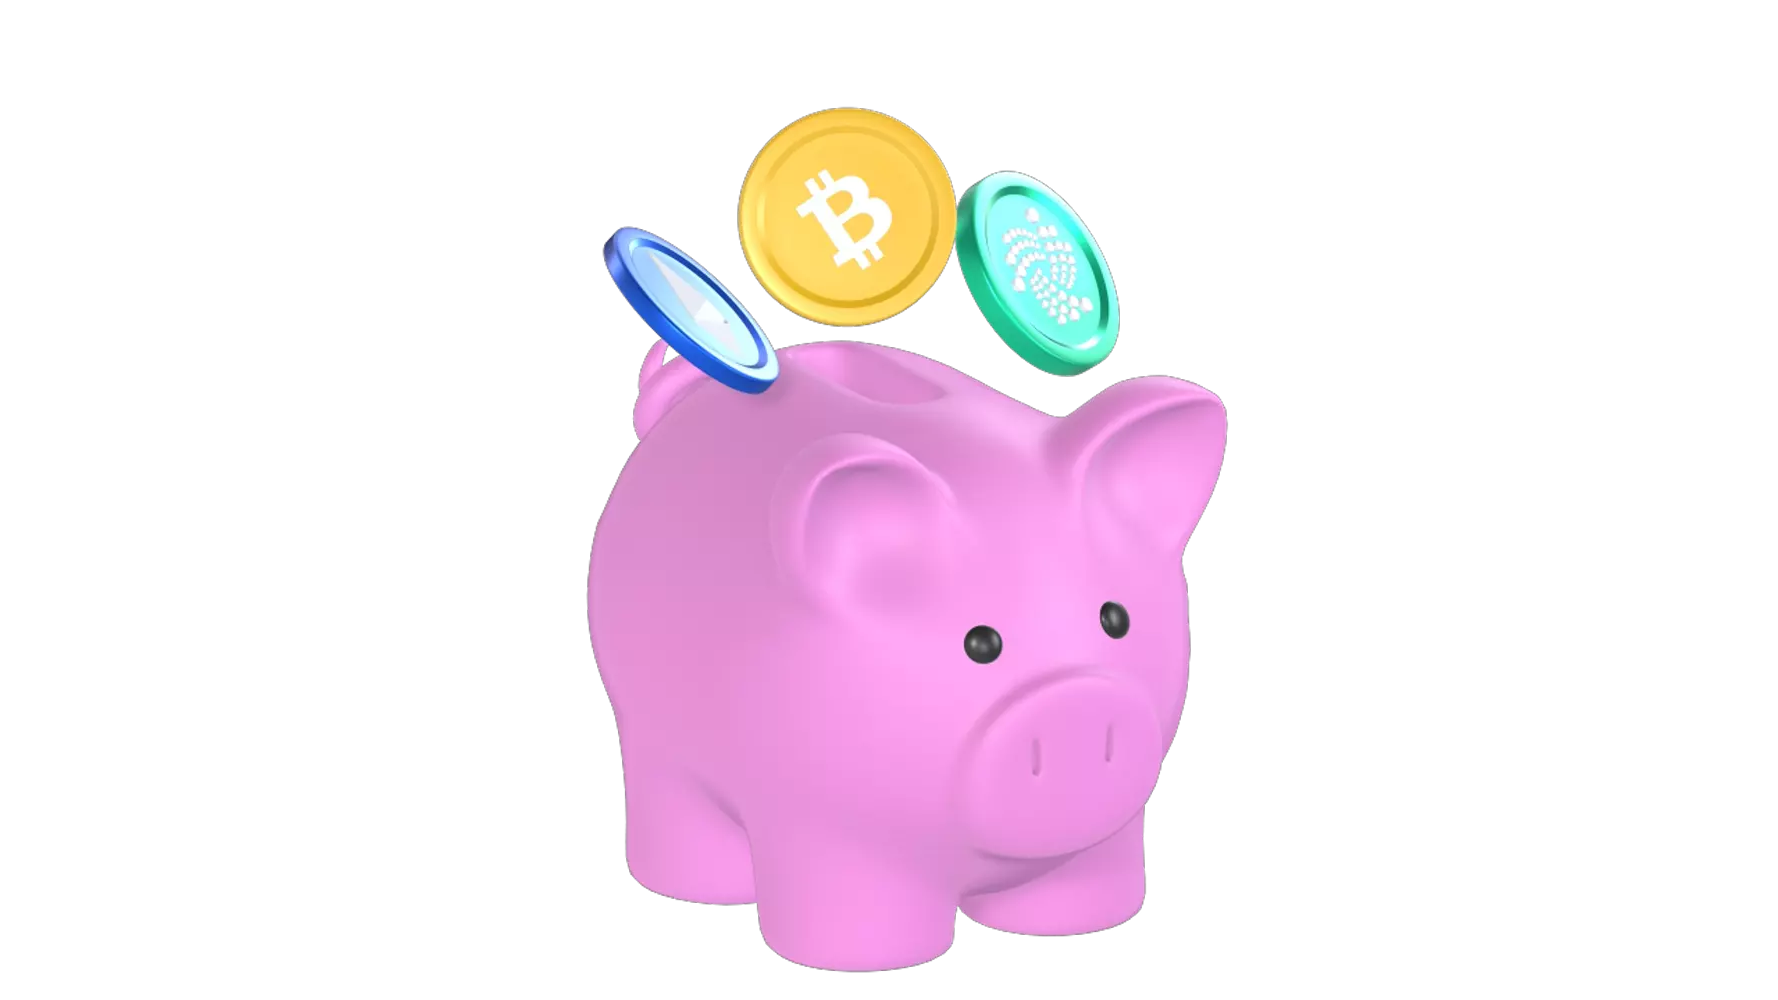 Cryptocurrency Savings 3D Graphic